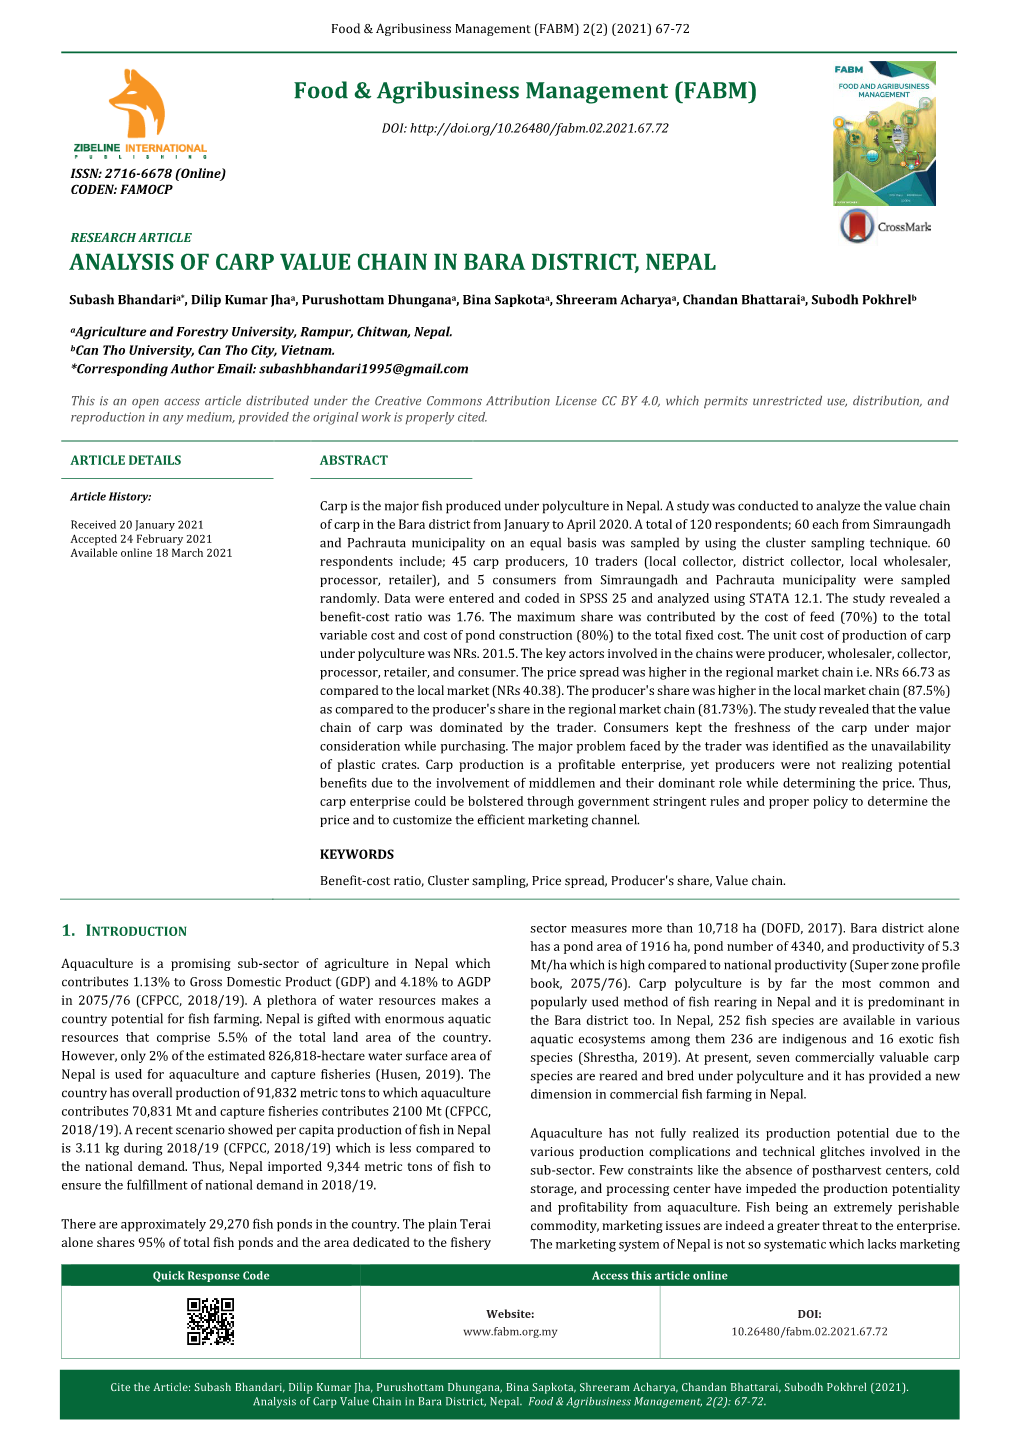 Analysis of Carp Value Chain in Bara District, Nepal